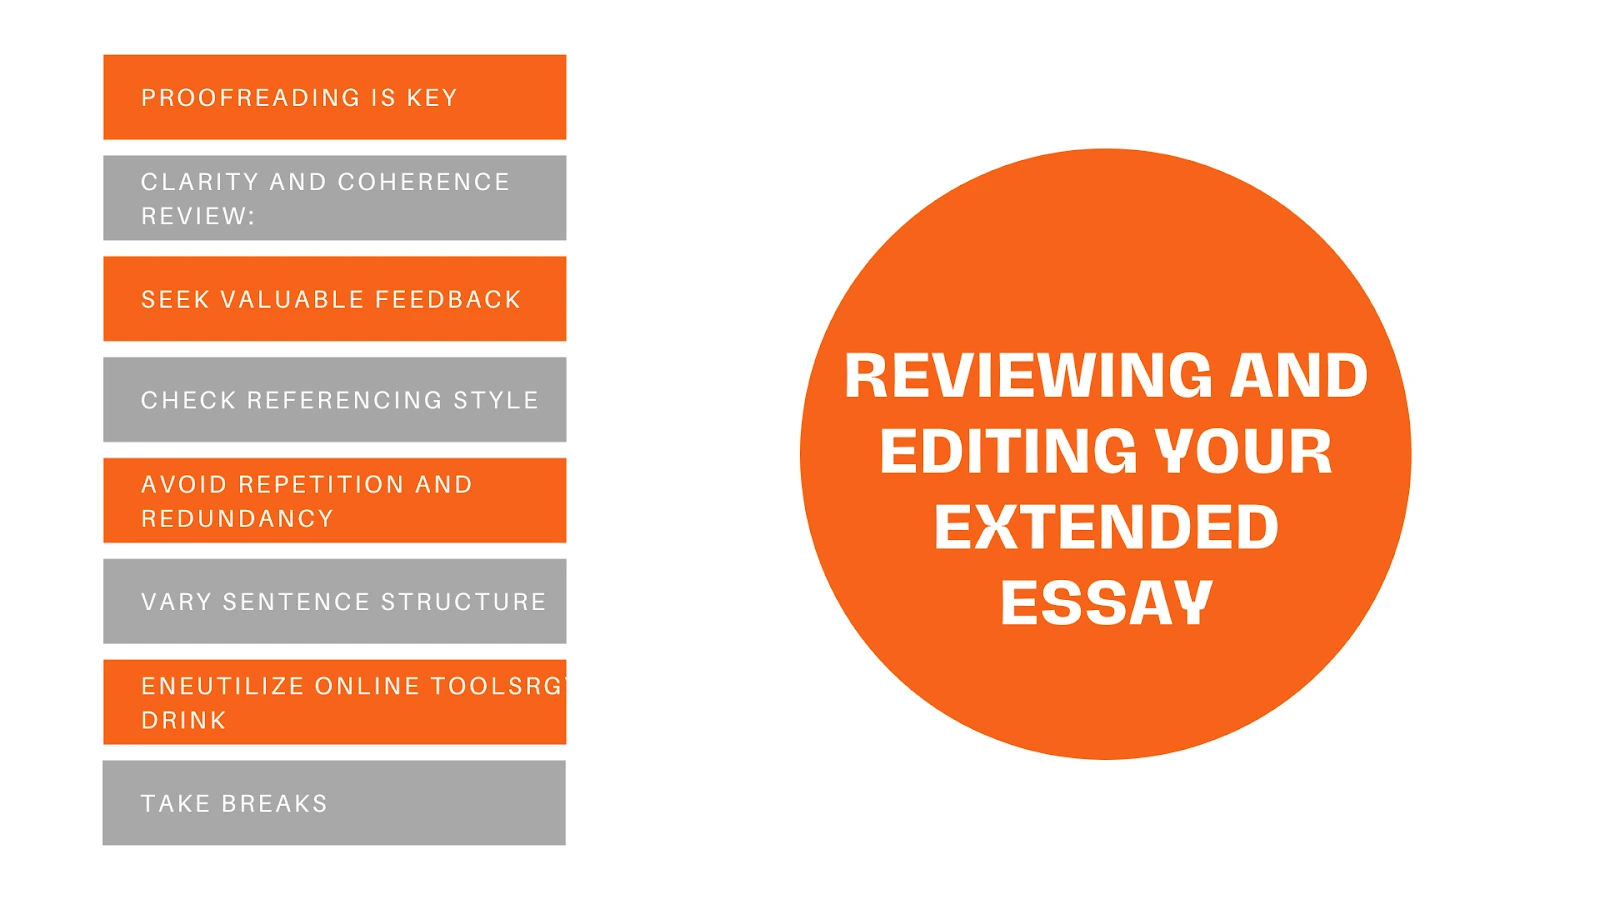 Image About Reviewing and Editing